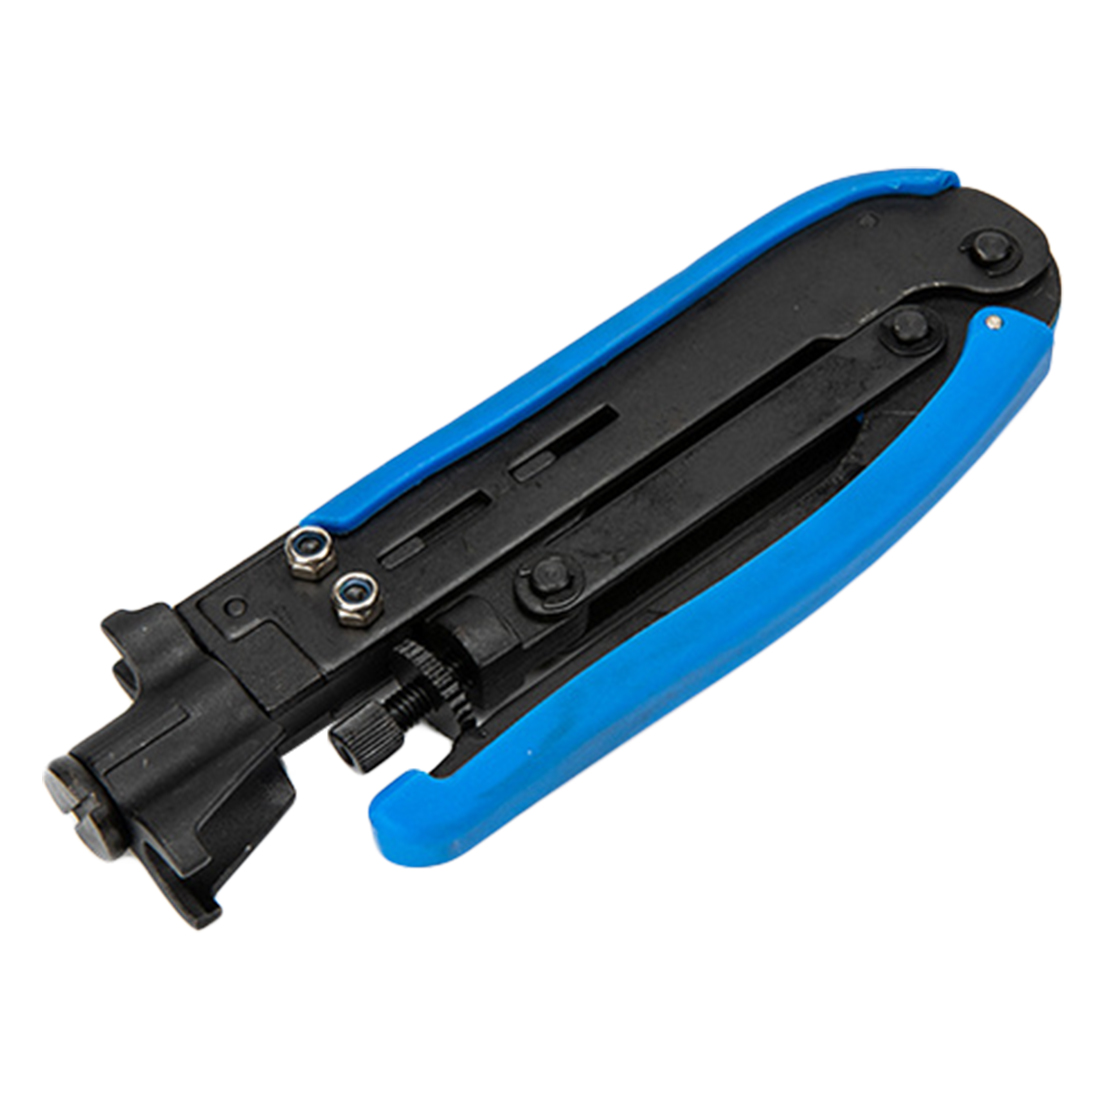 Electric Stripping Tools 1pcs Compression Wire Crimper Plier Crimping Tool For RG59 RG6 RG11 F Coaxial Connectors Cable